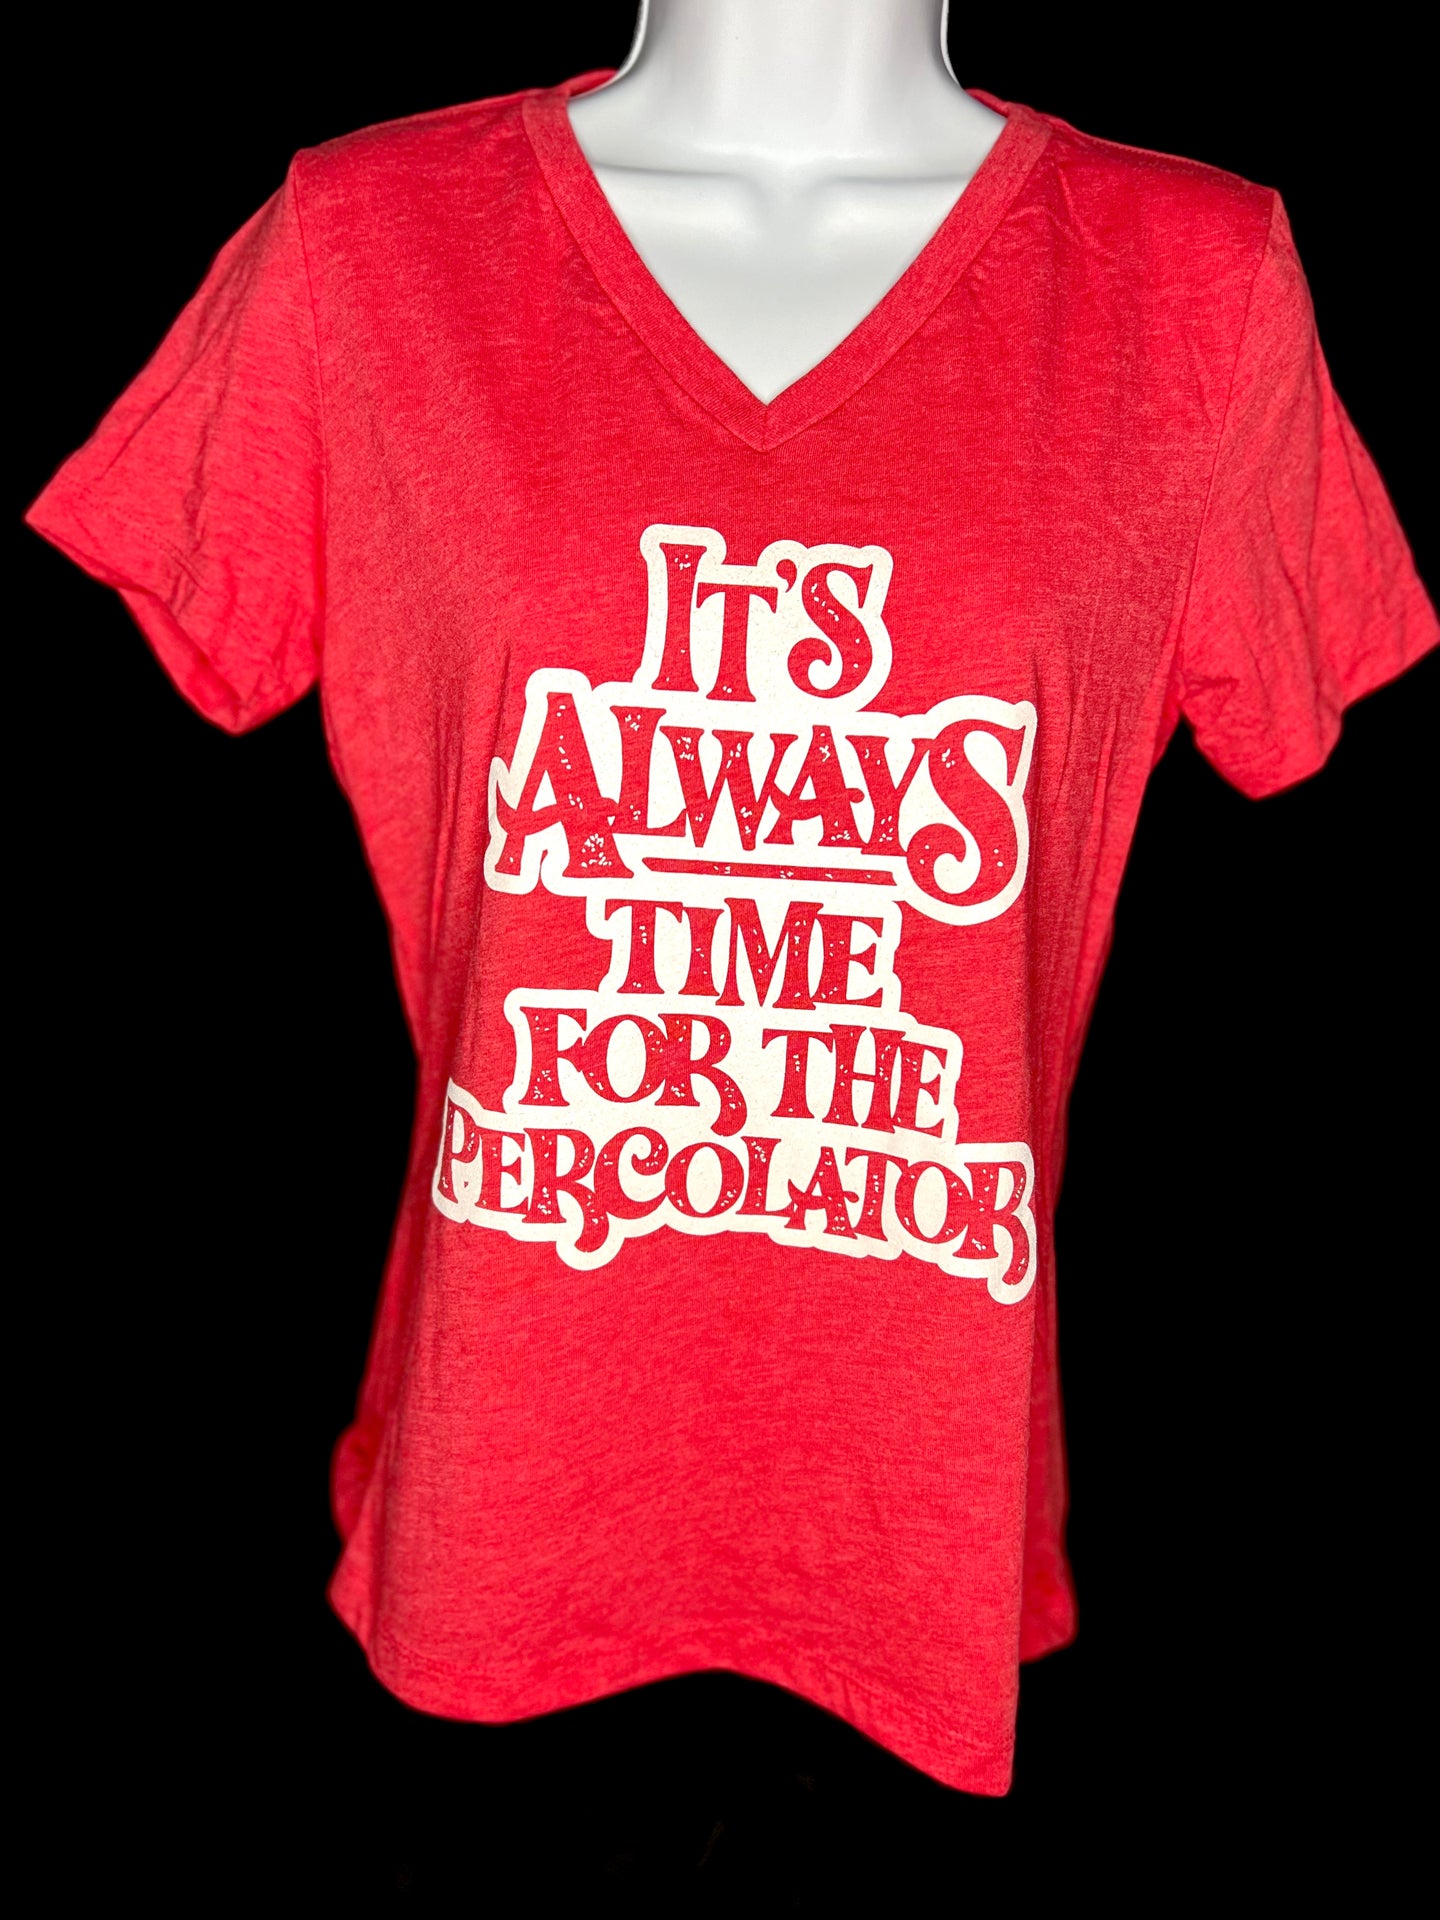 It's ALWAYS Time For The Percolator™ - Heather Red V-Neck T-Shirt (Women's)